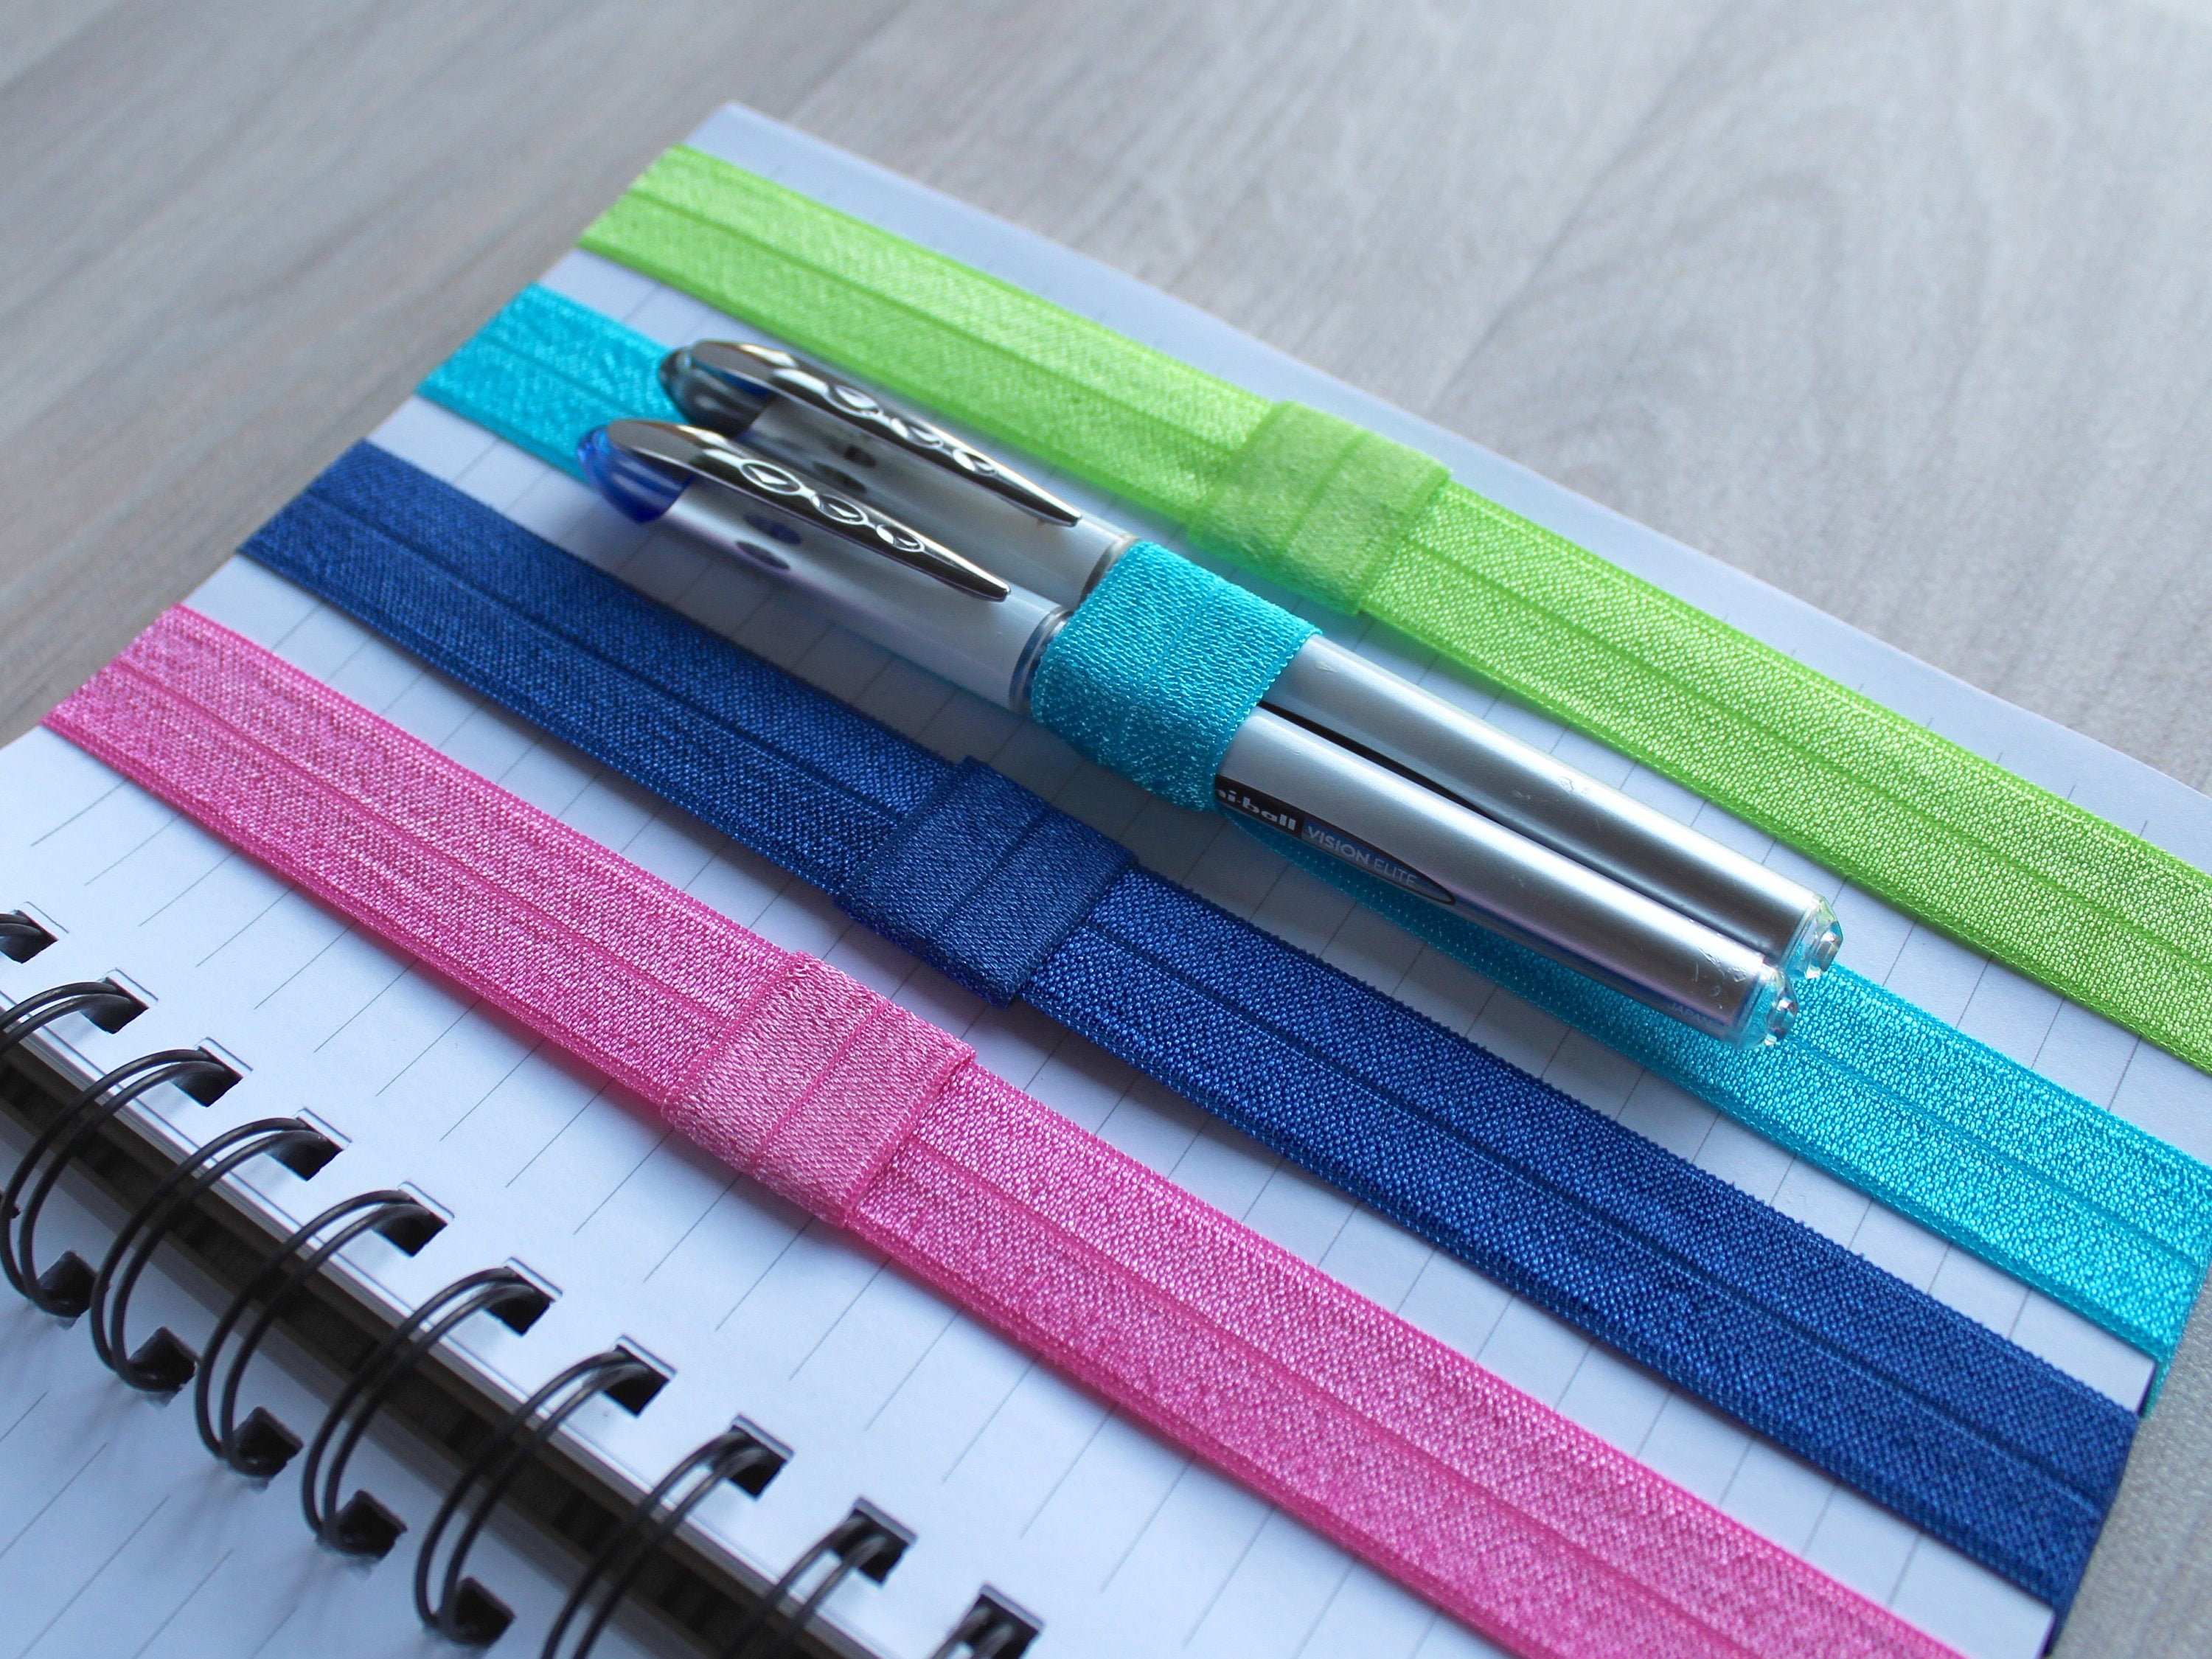 Pencil Case Blue for Study or School, Small Pencil Case With Rubber Loops  for Rolling, Pen Roll Fox, Small Barthel 